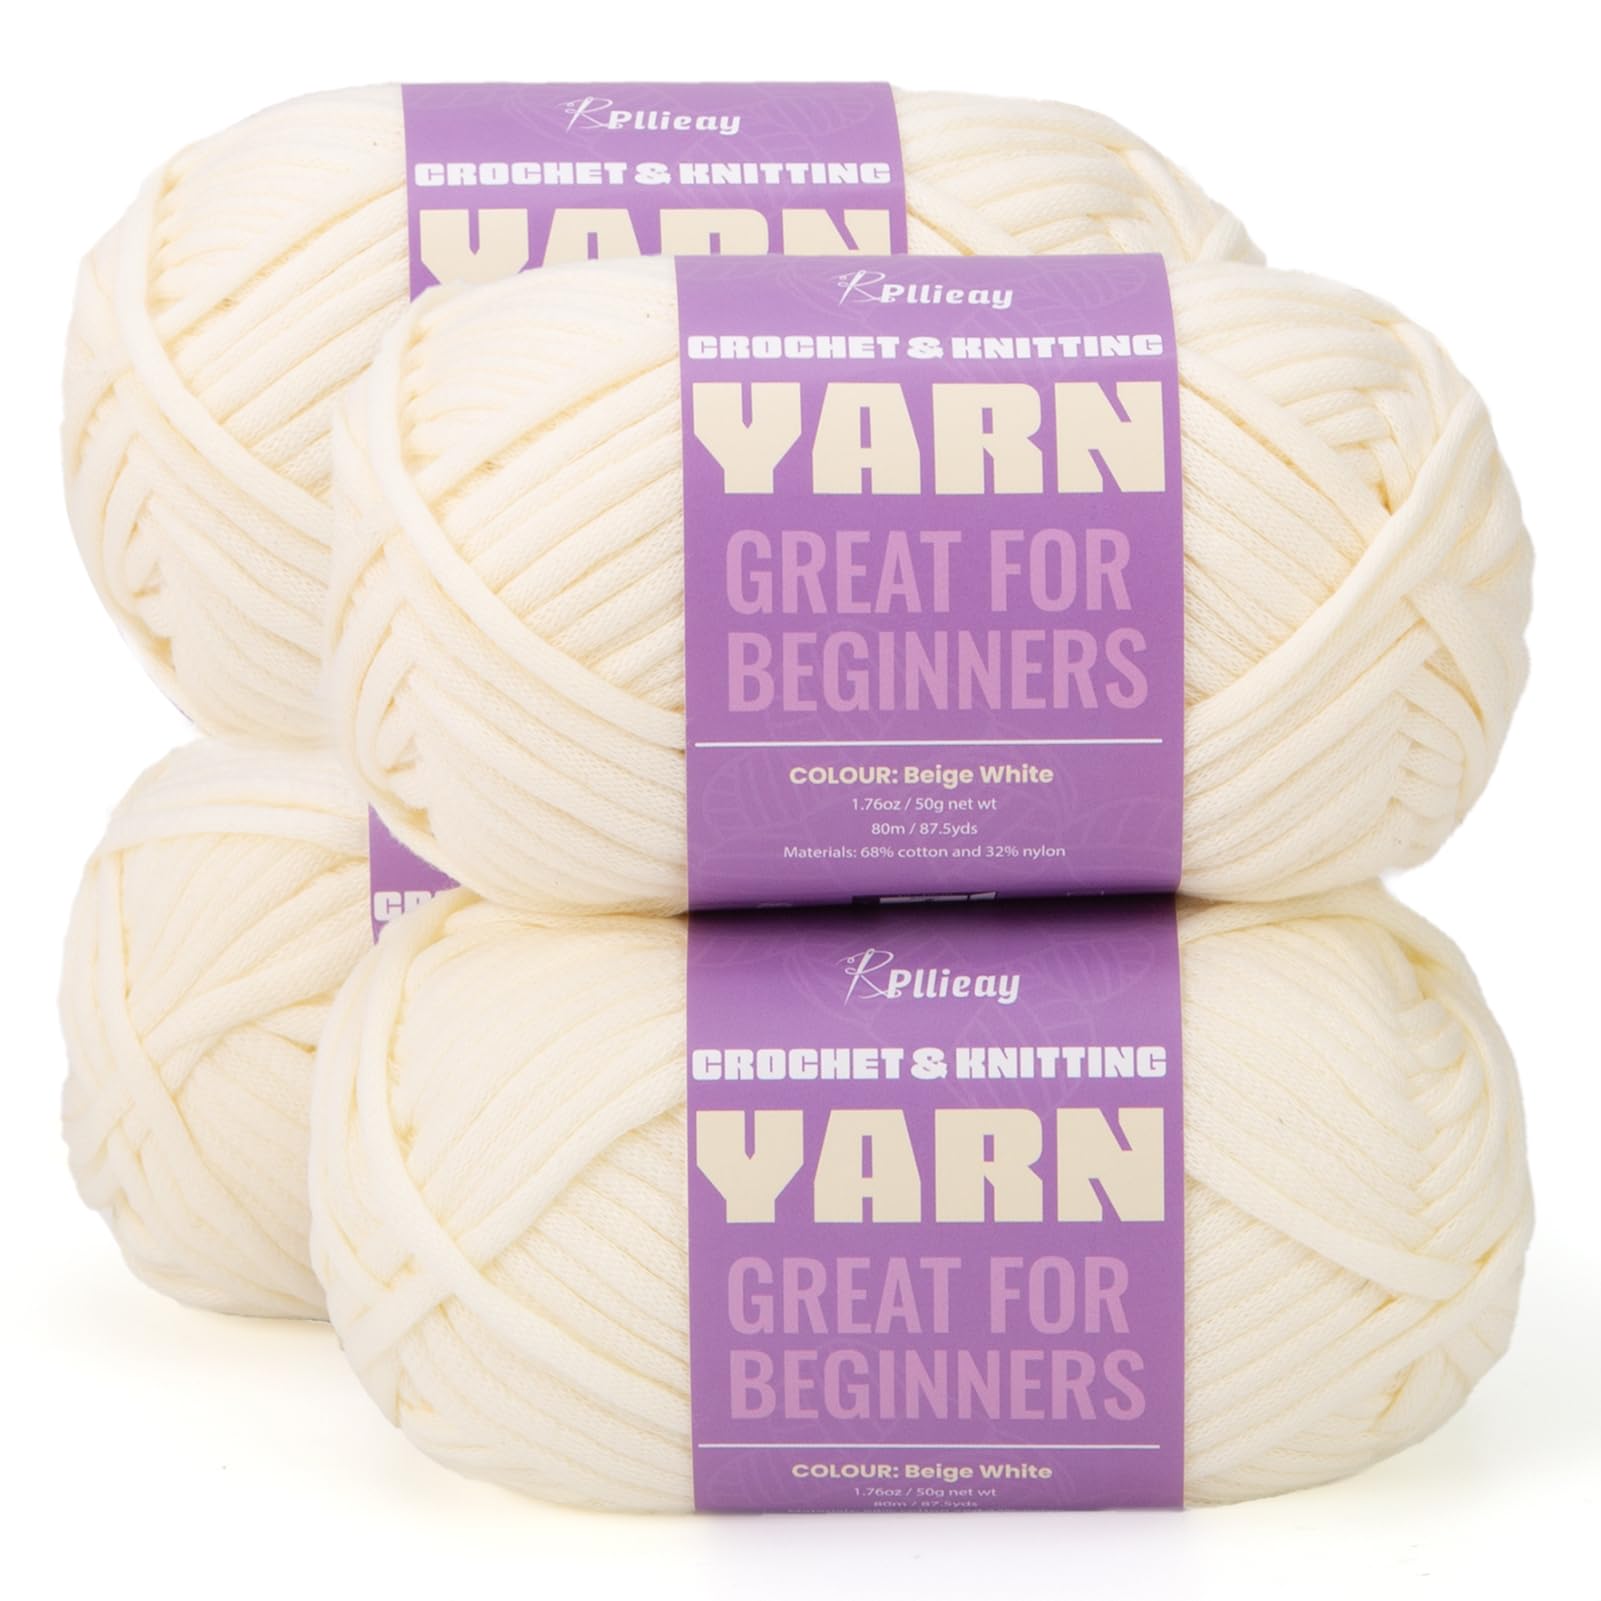  Pllieay Gray Yarn for Crocheting and Knitting (4x50g) Cotton  Yarn for Crocheting Crochet Knitting Yarn with Easy-to-See Stitches Yarn  for Beginners - Worsted Medium #4 Yarn - Cotton-Nylon Blend